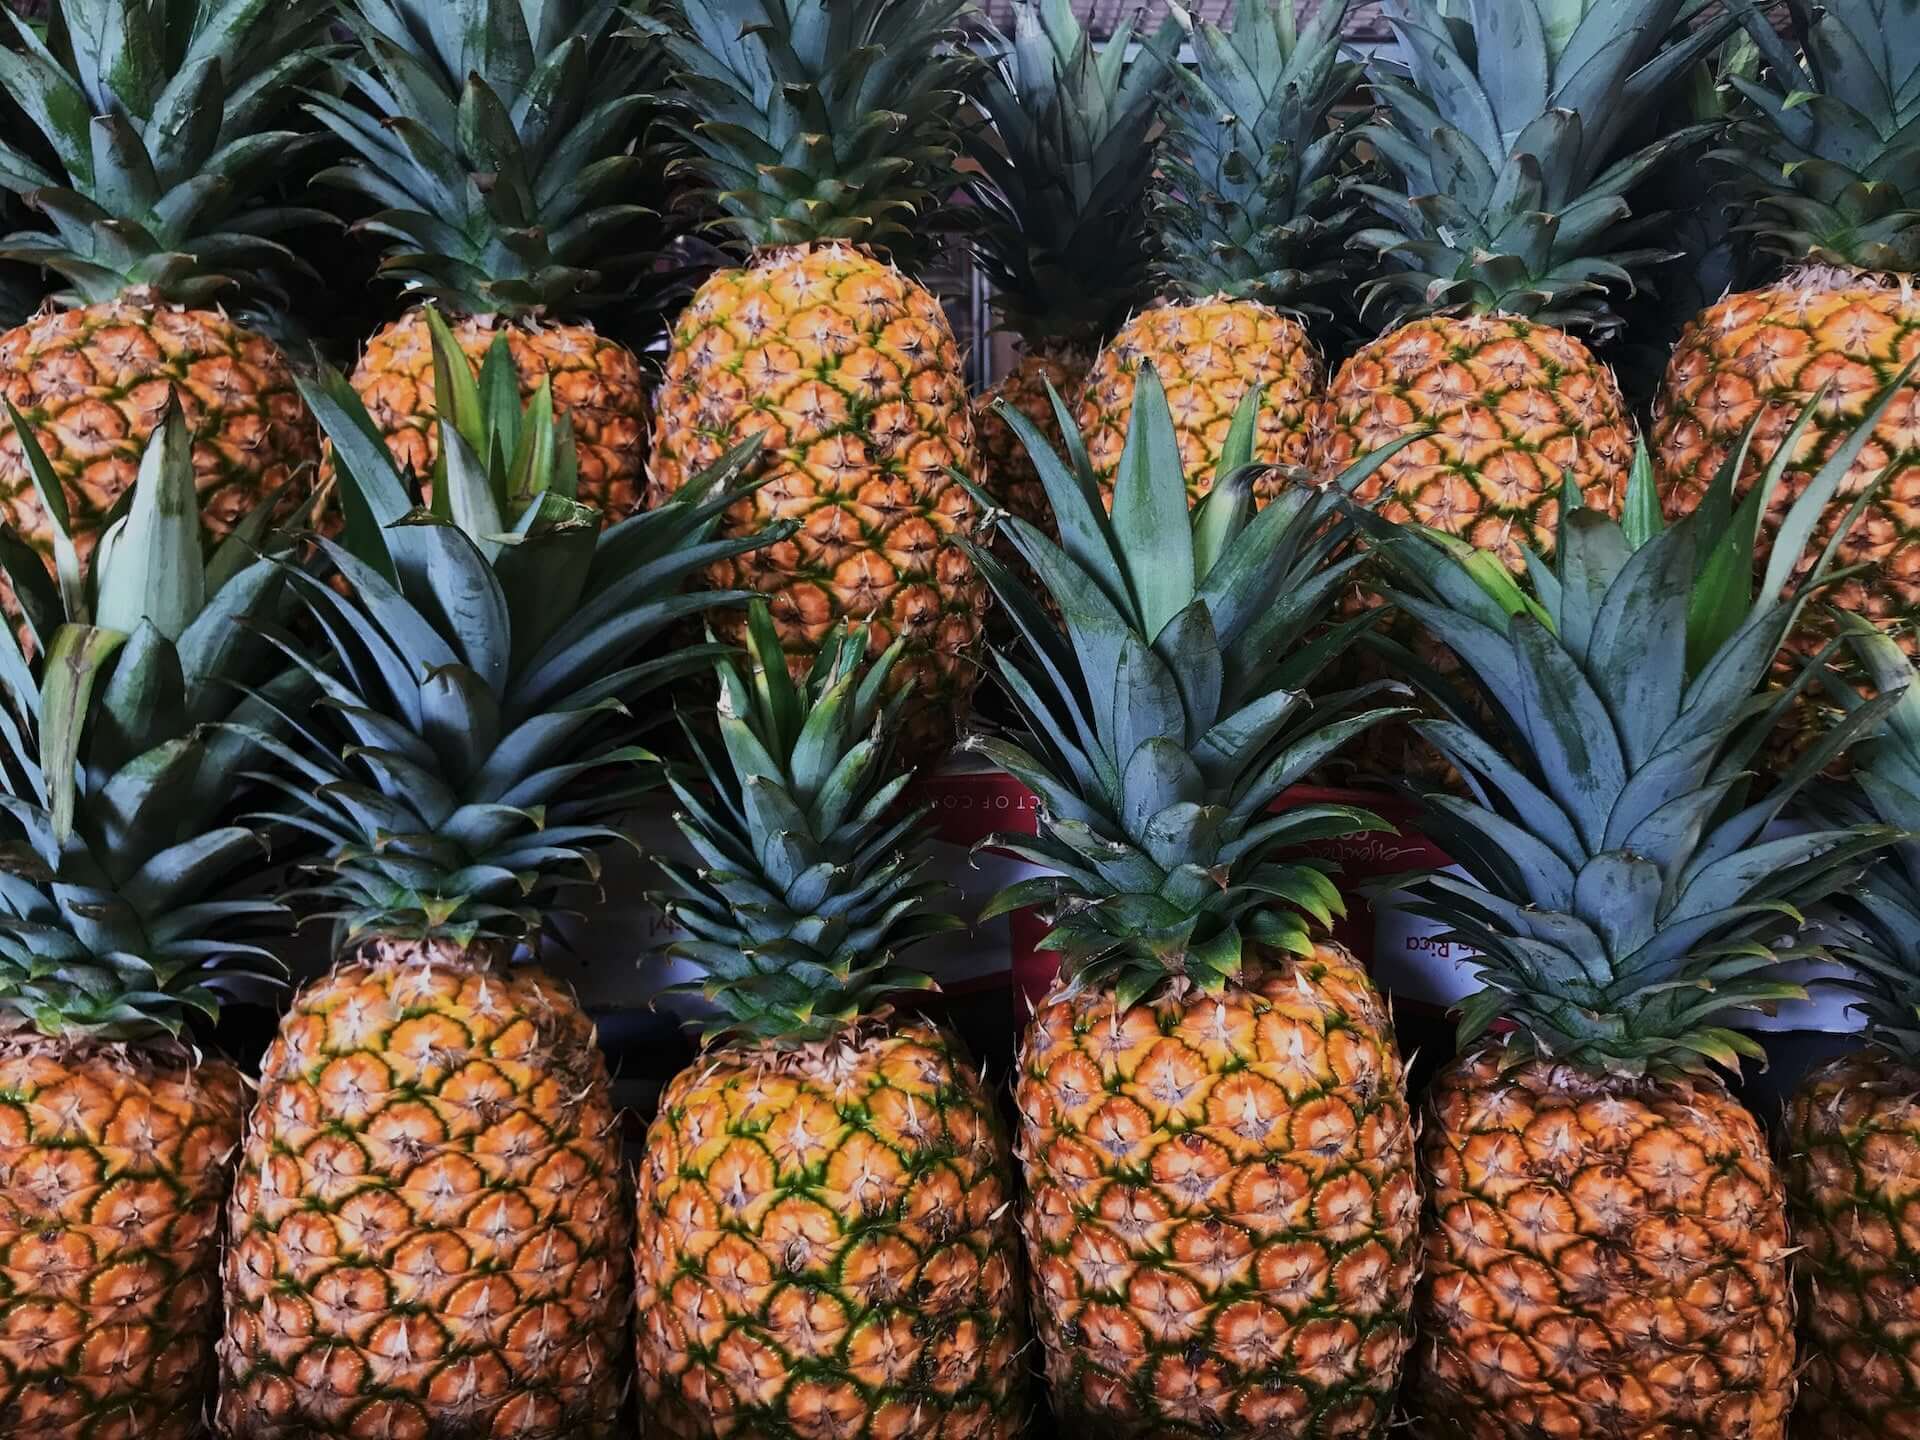 Two rows of whole pineapples with green leaves.